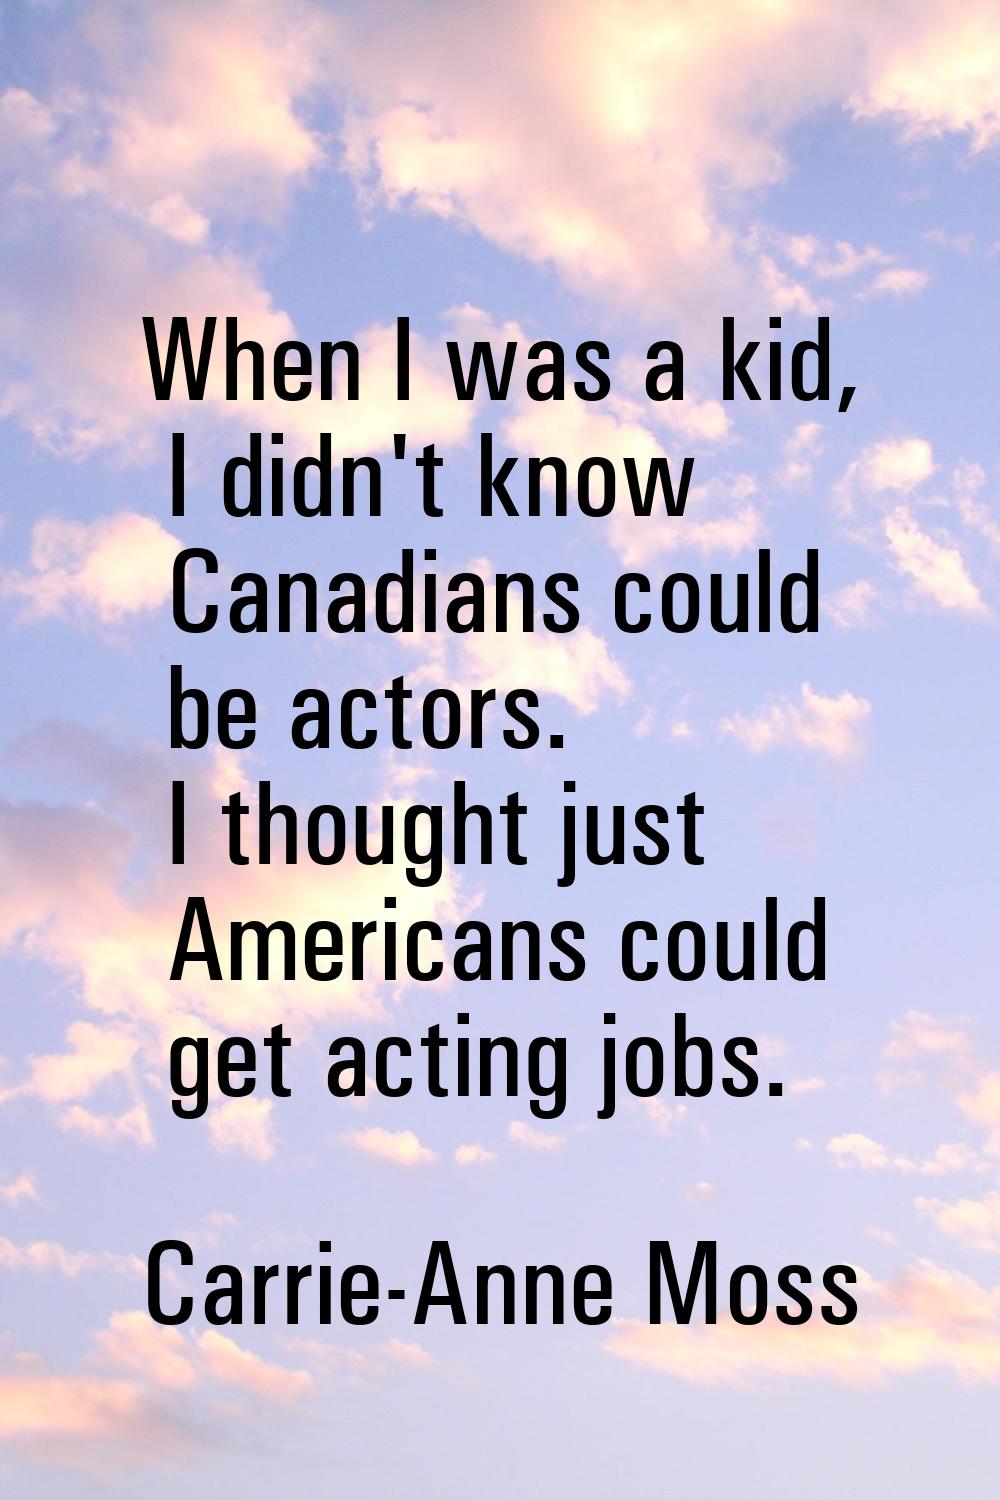 When I was a kid, I didn't know Canadians could be actors. I thought just Americans could get actin